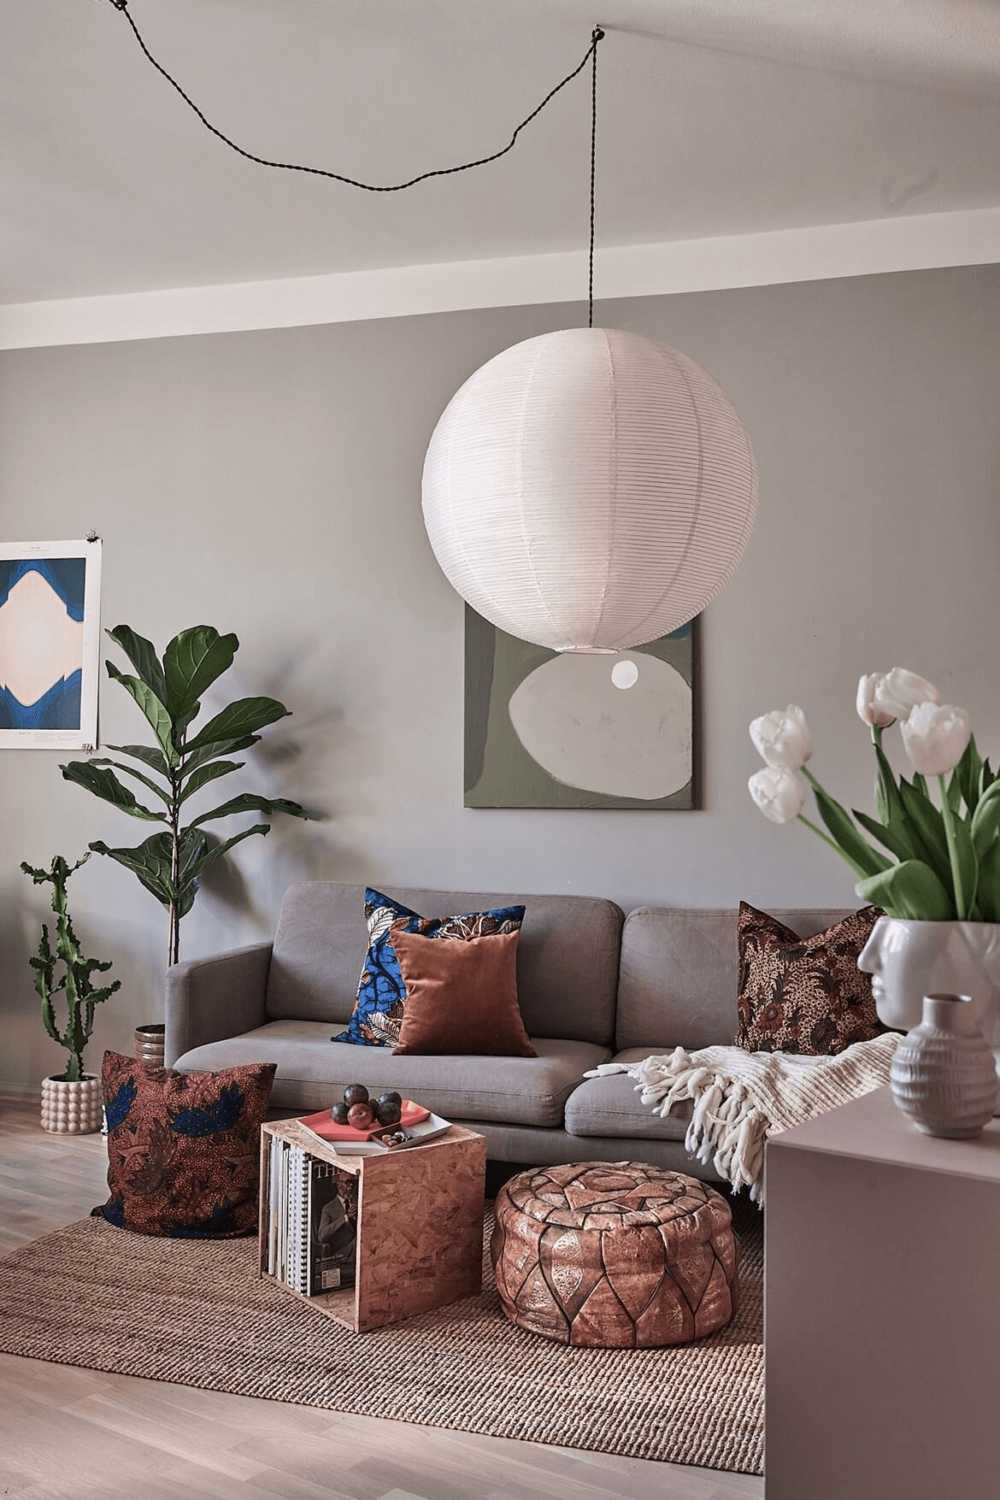 Expect Bright Colors to Influence 2020 Color and Design Trends